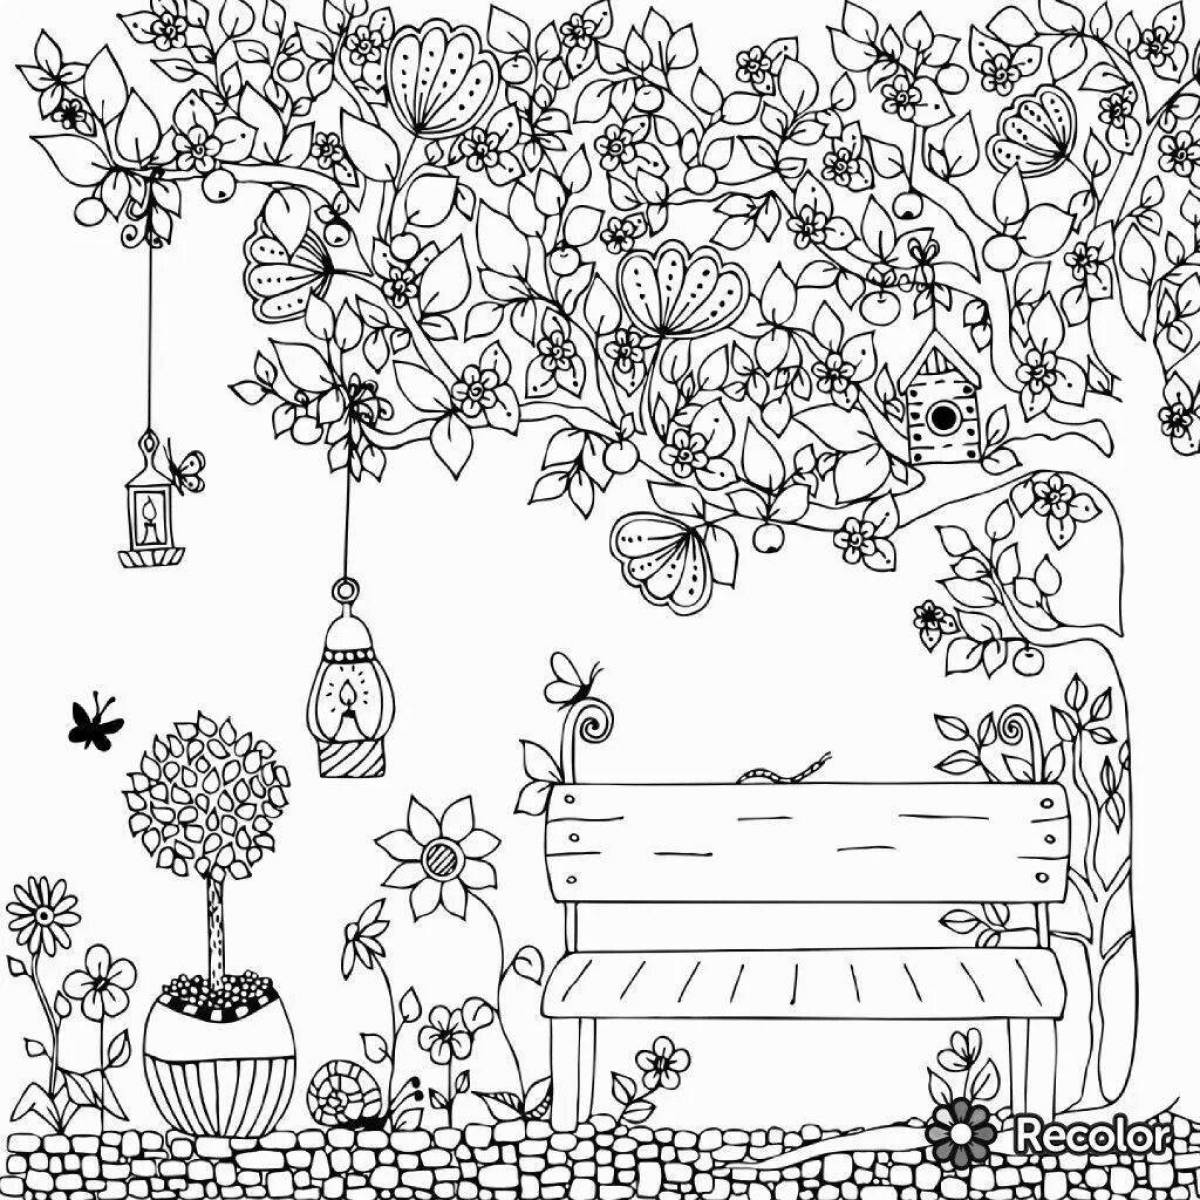 Amazing garden coloring book for kids